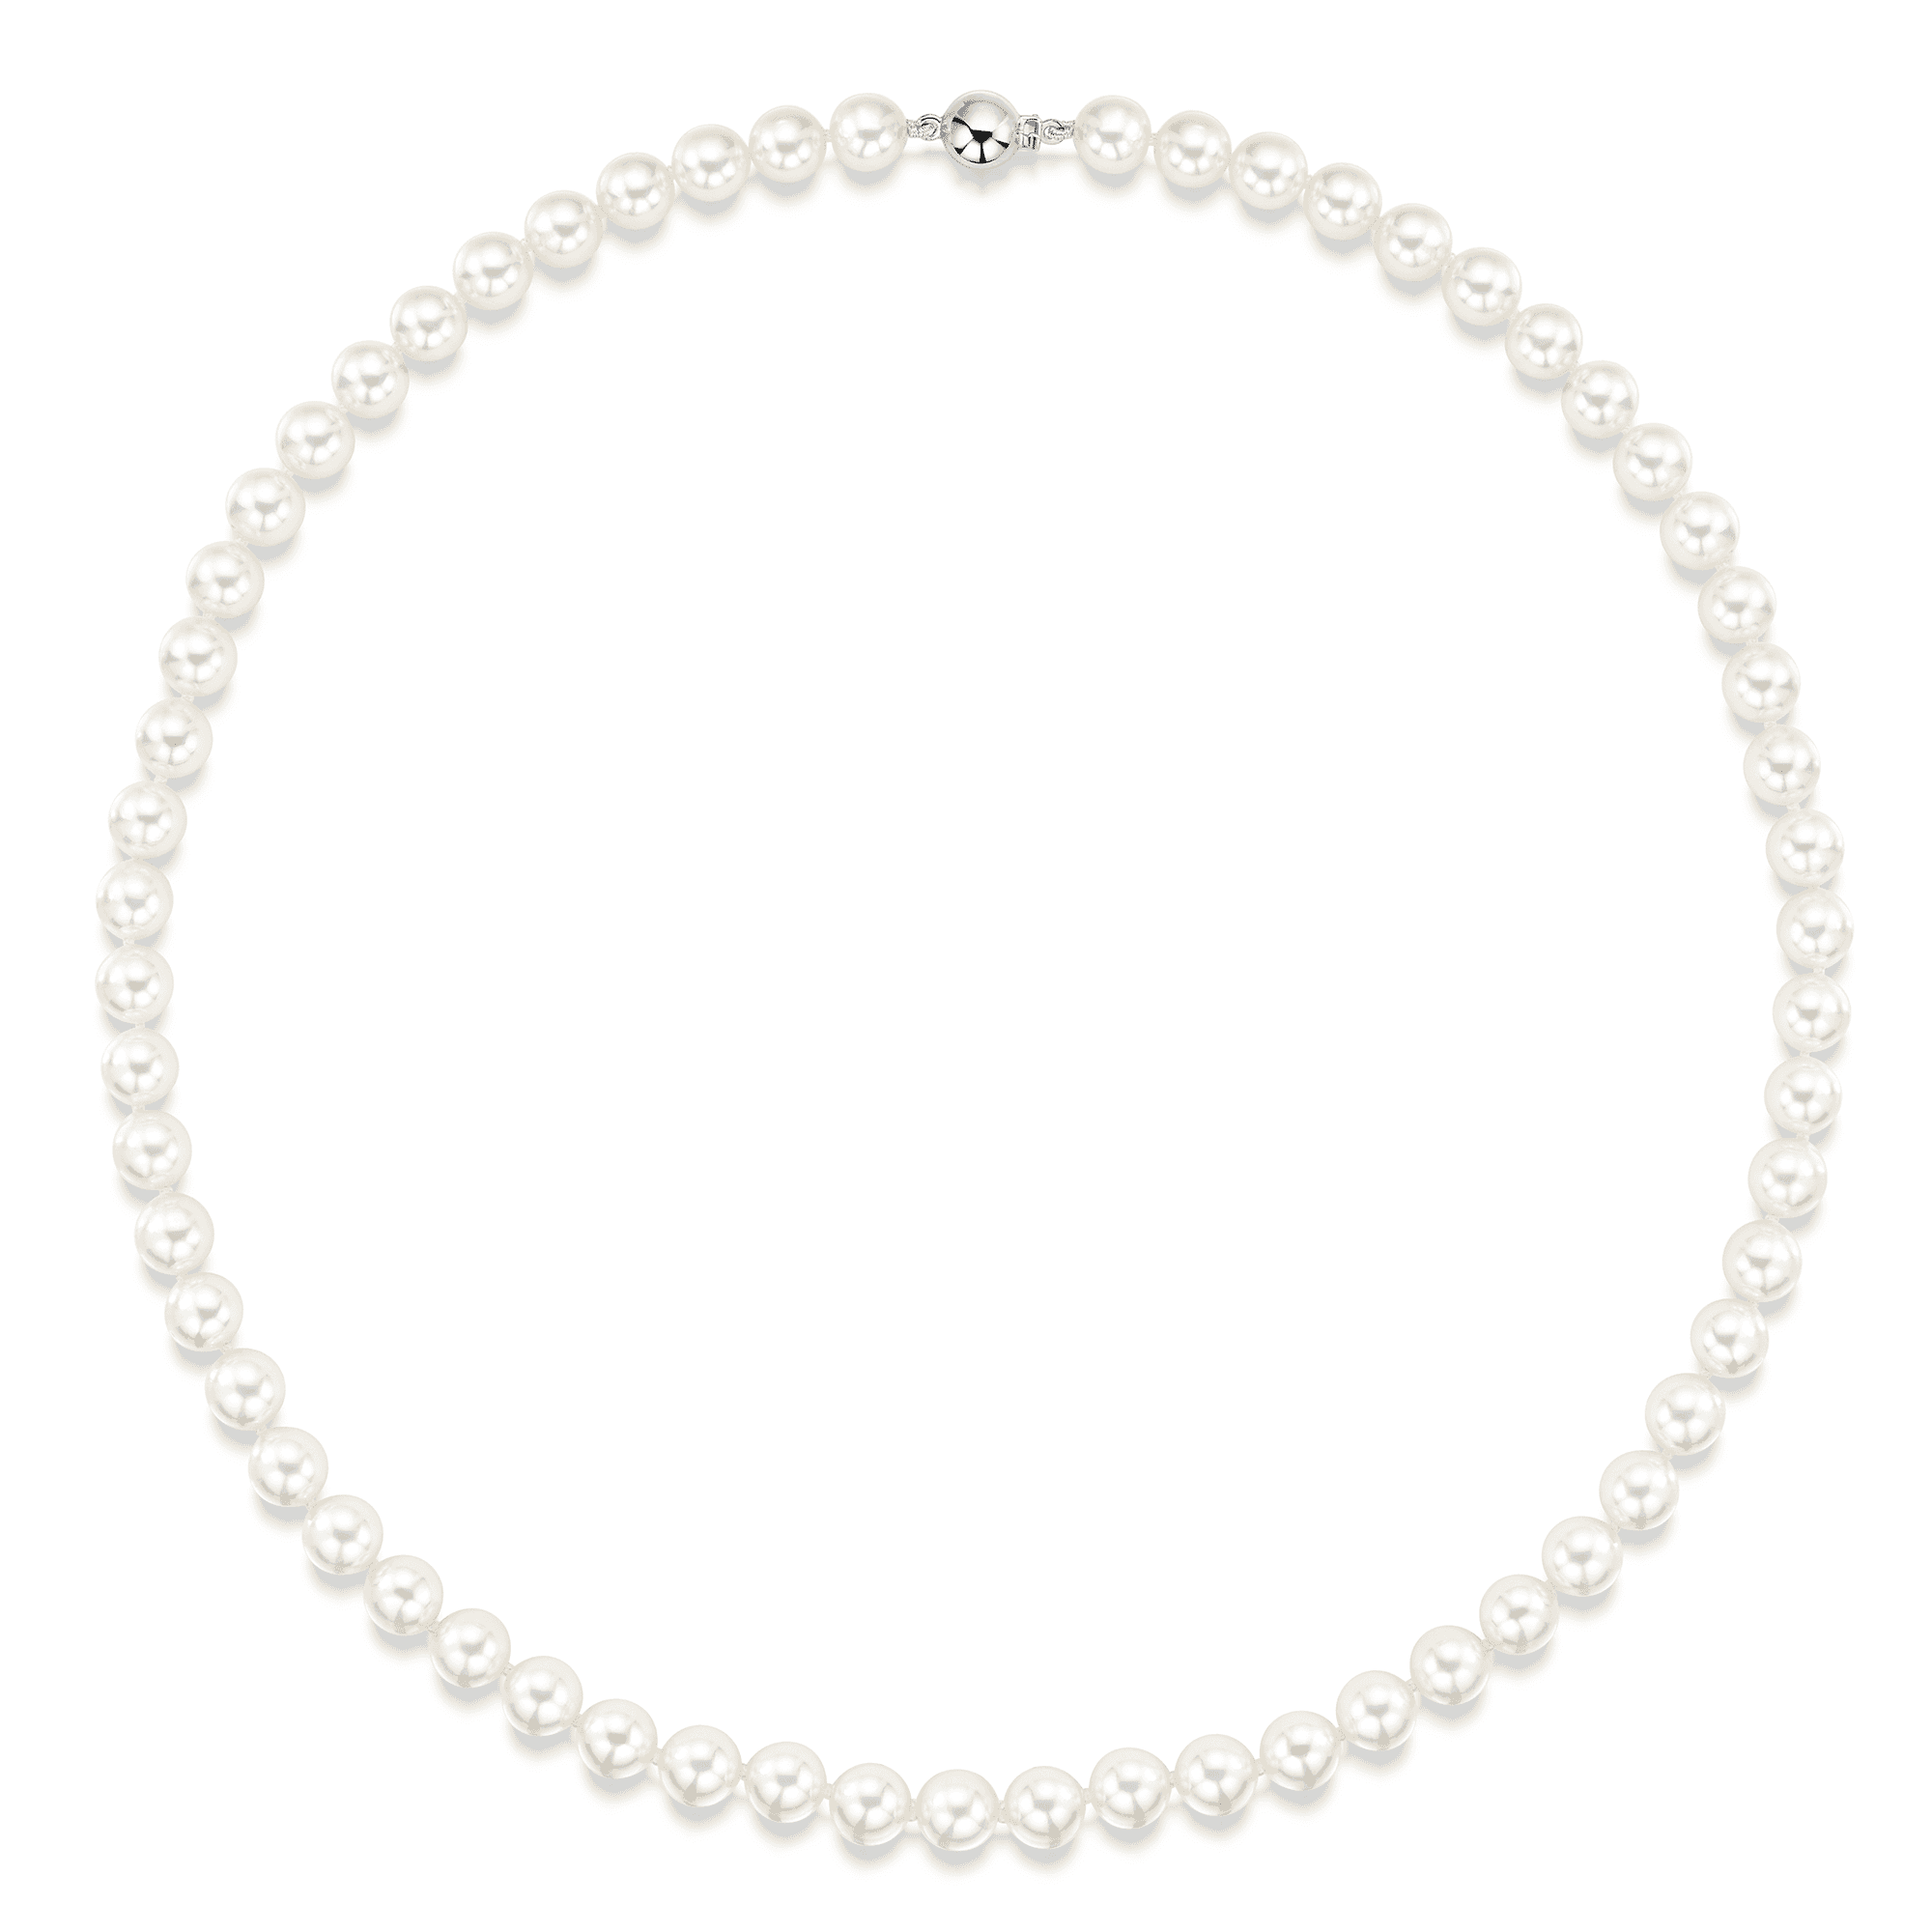 Akoya 6.5-7mm Pearl Necklet with 18ct White Gold Ball Clasp